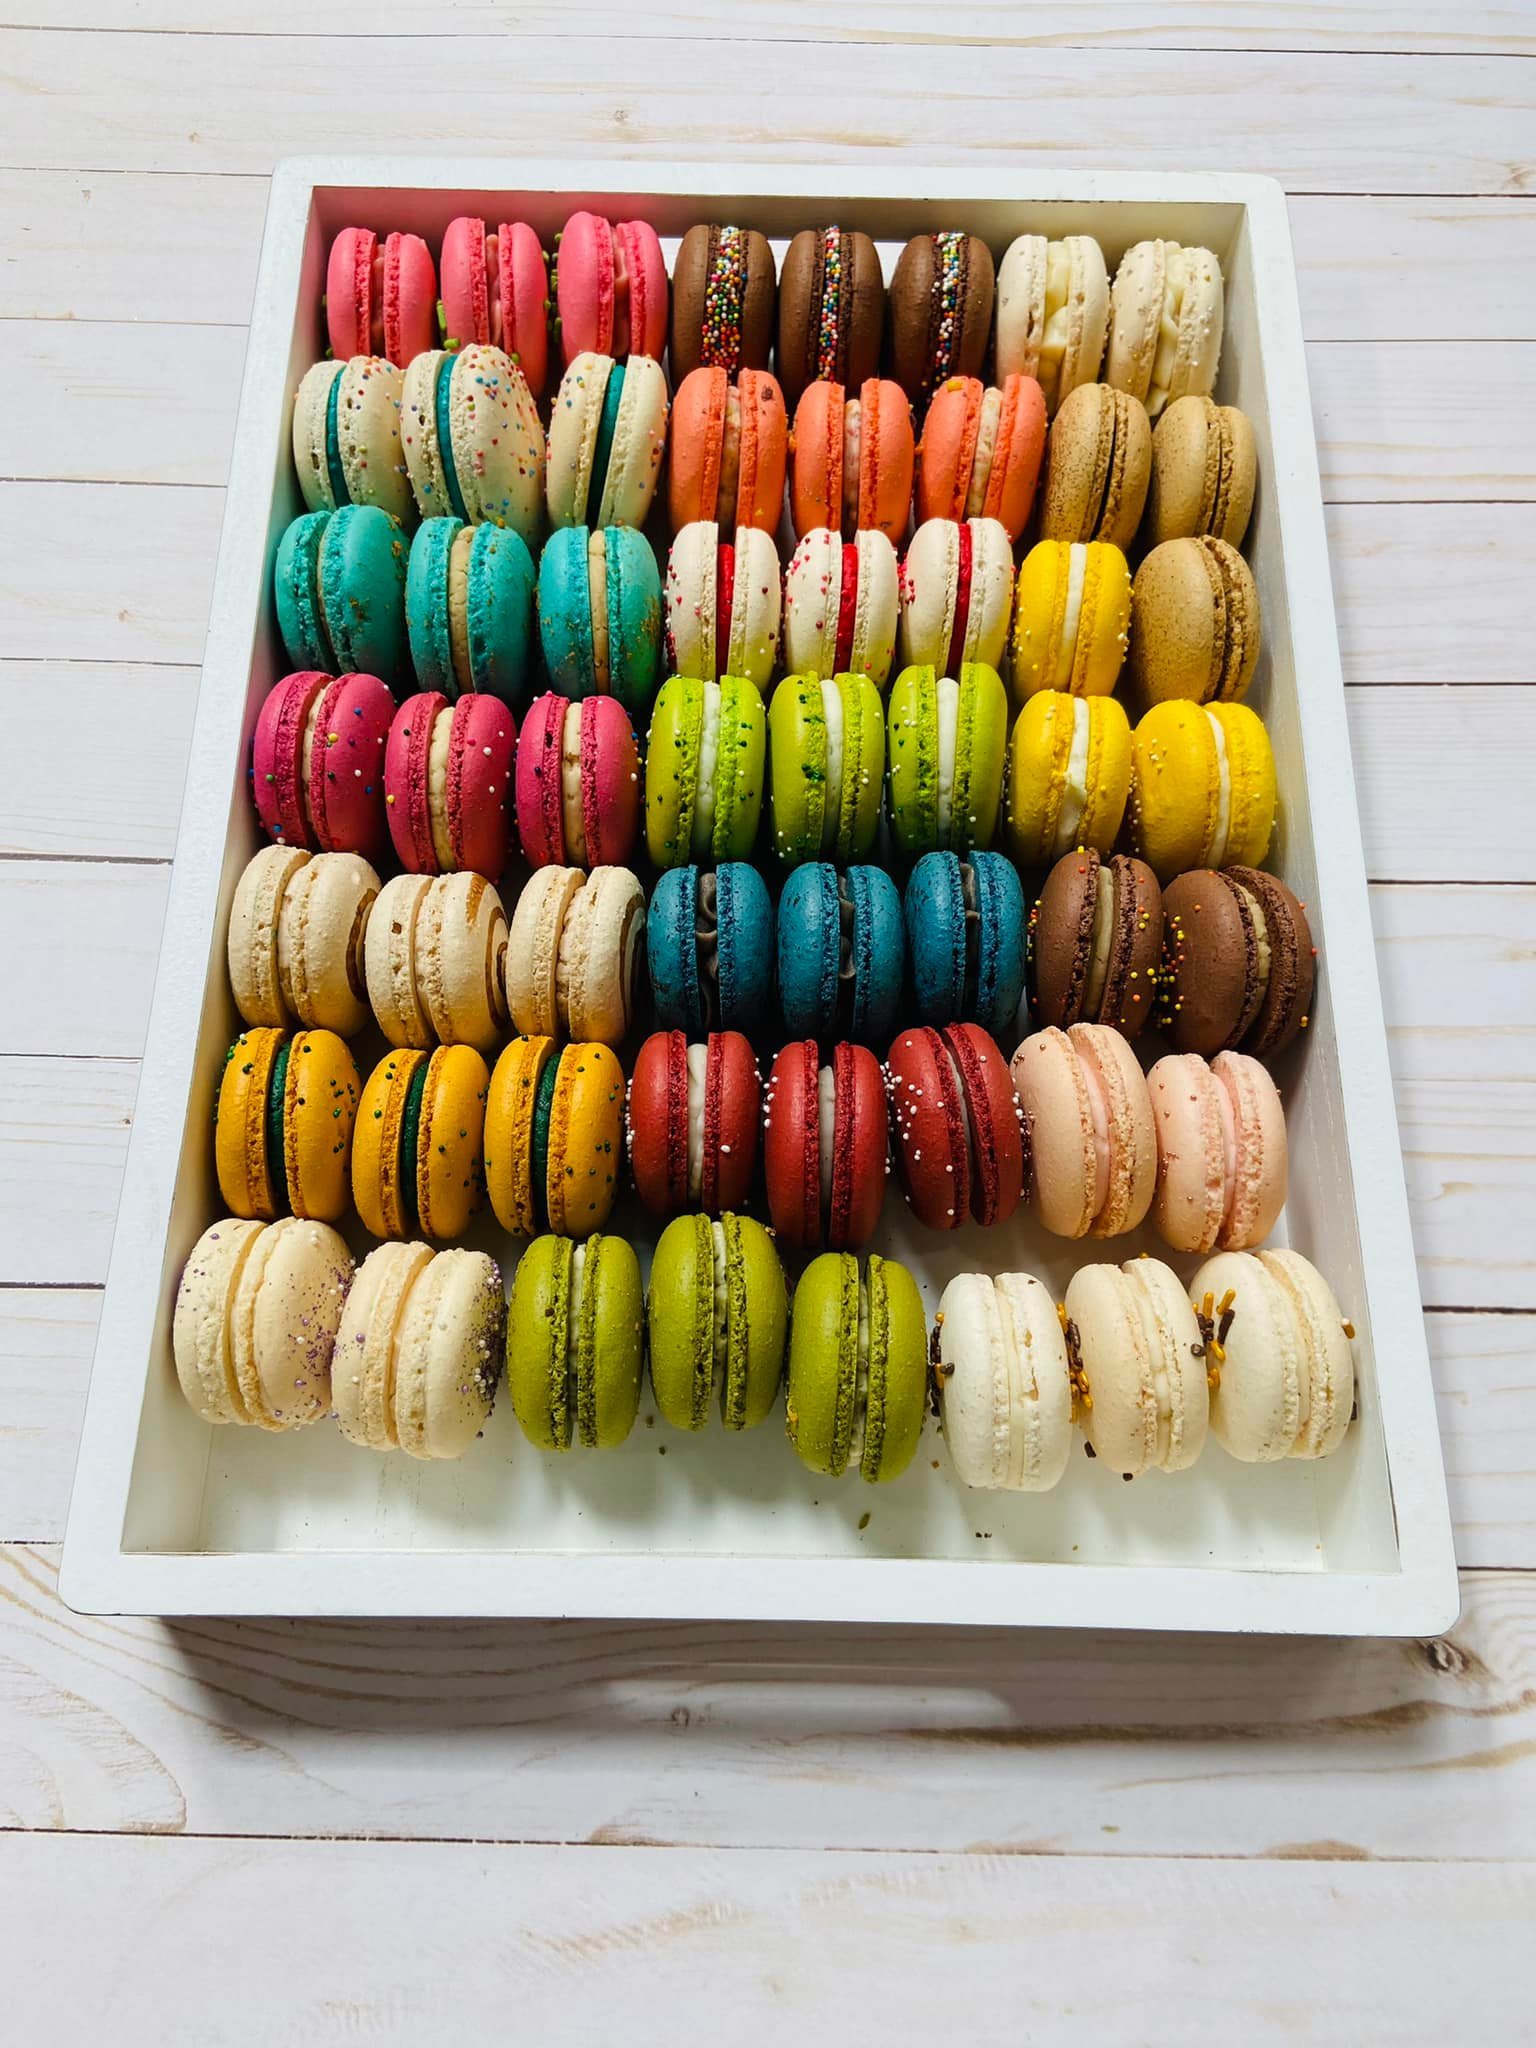 A box of assorted macarons